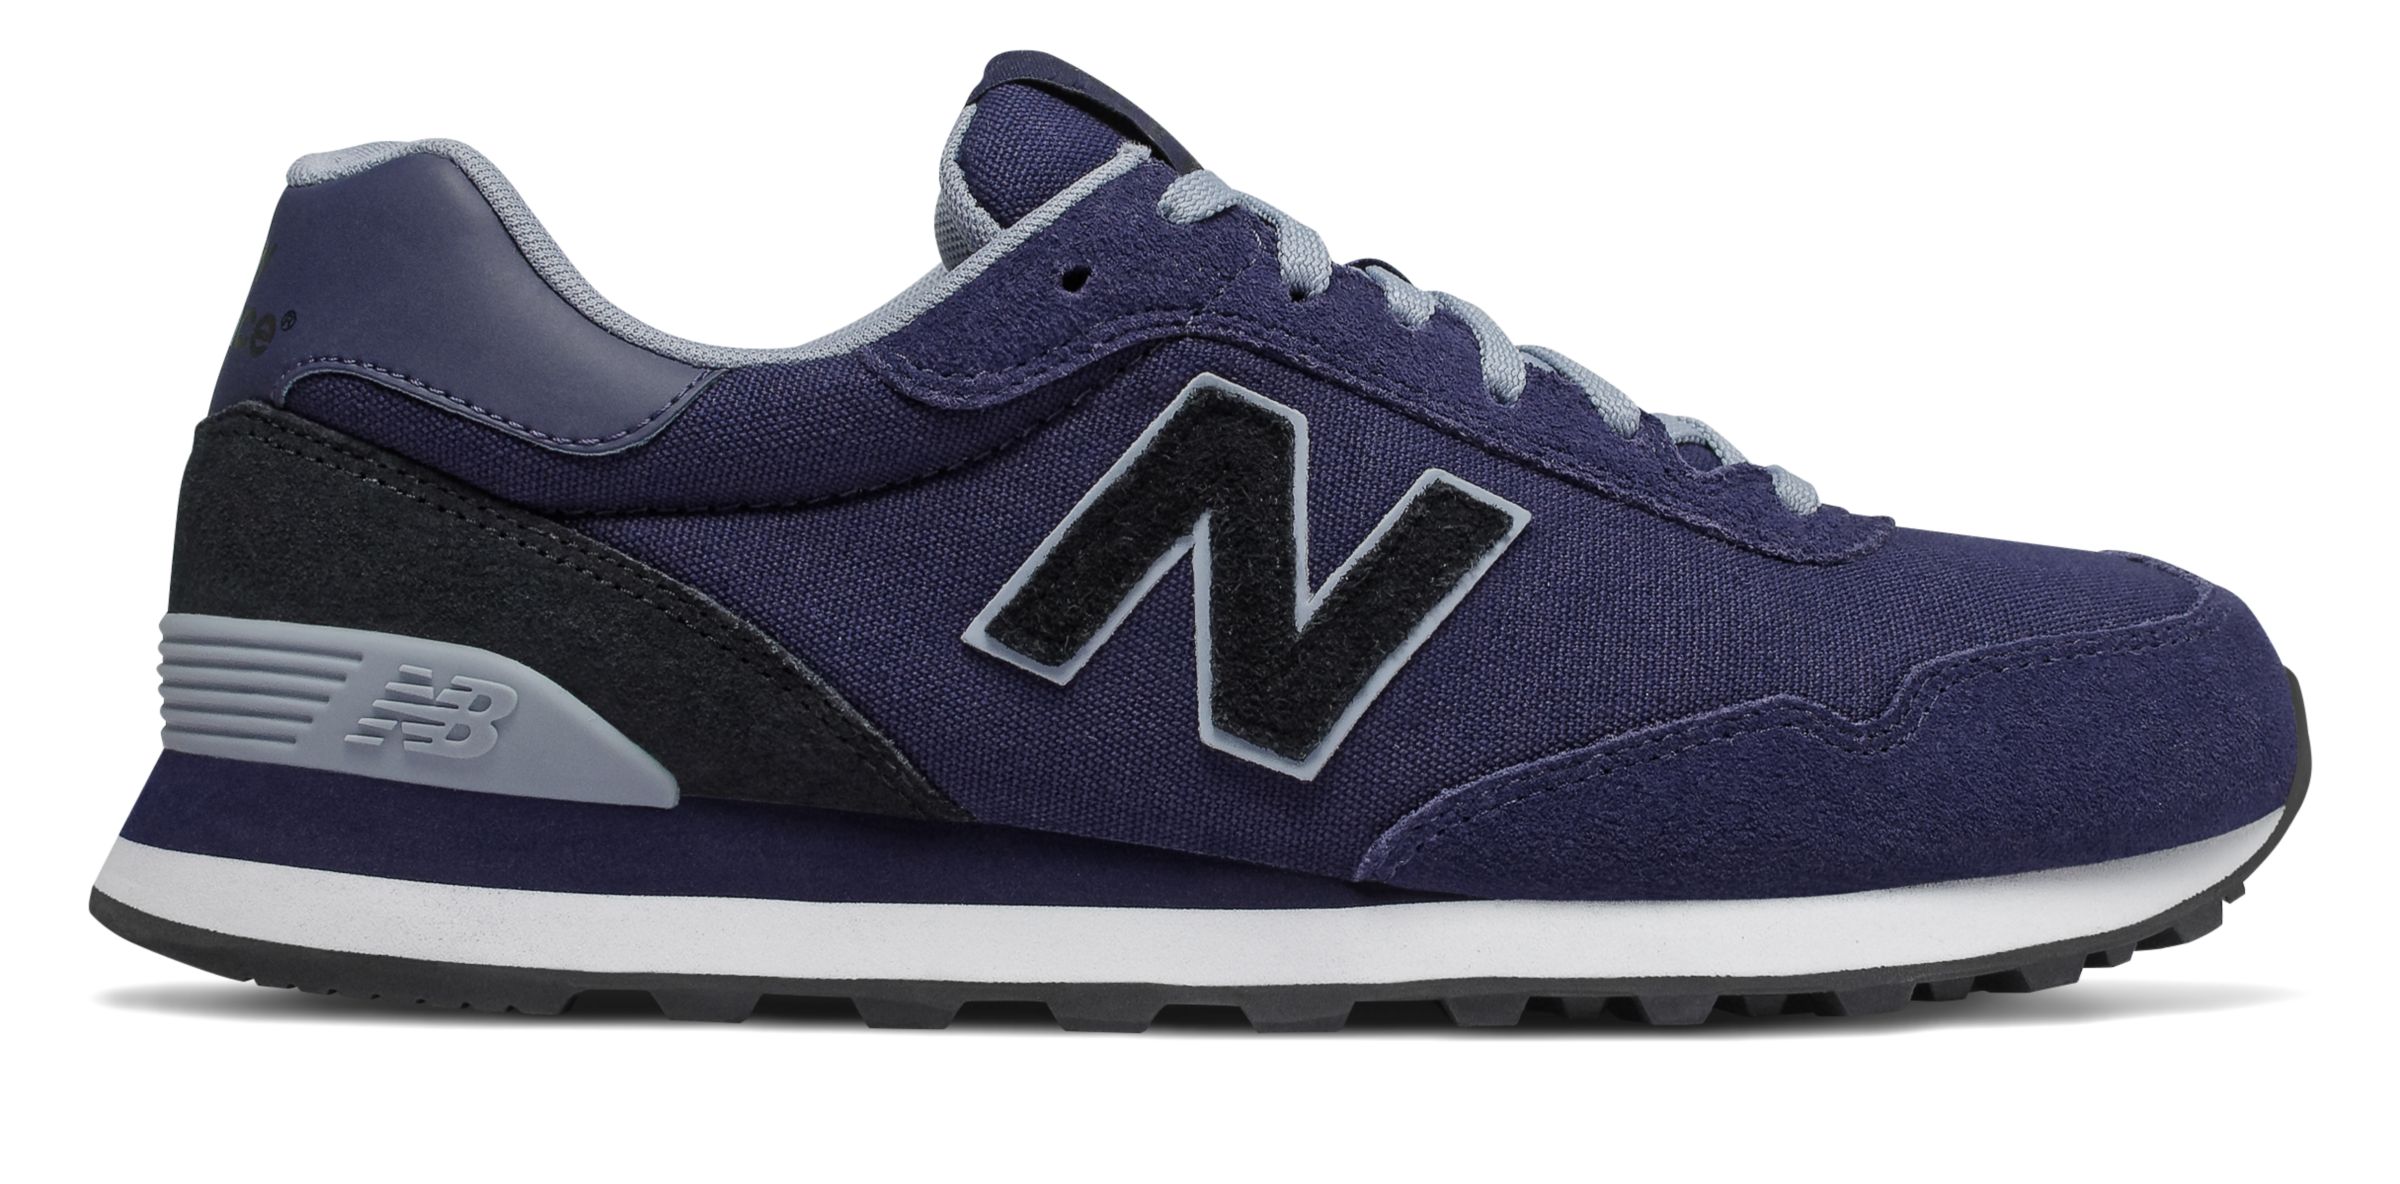 New Balance ML515 on Sale - Discounts Up to 57% Off on ML515CNR at Joe's New  Balance Outlet